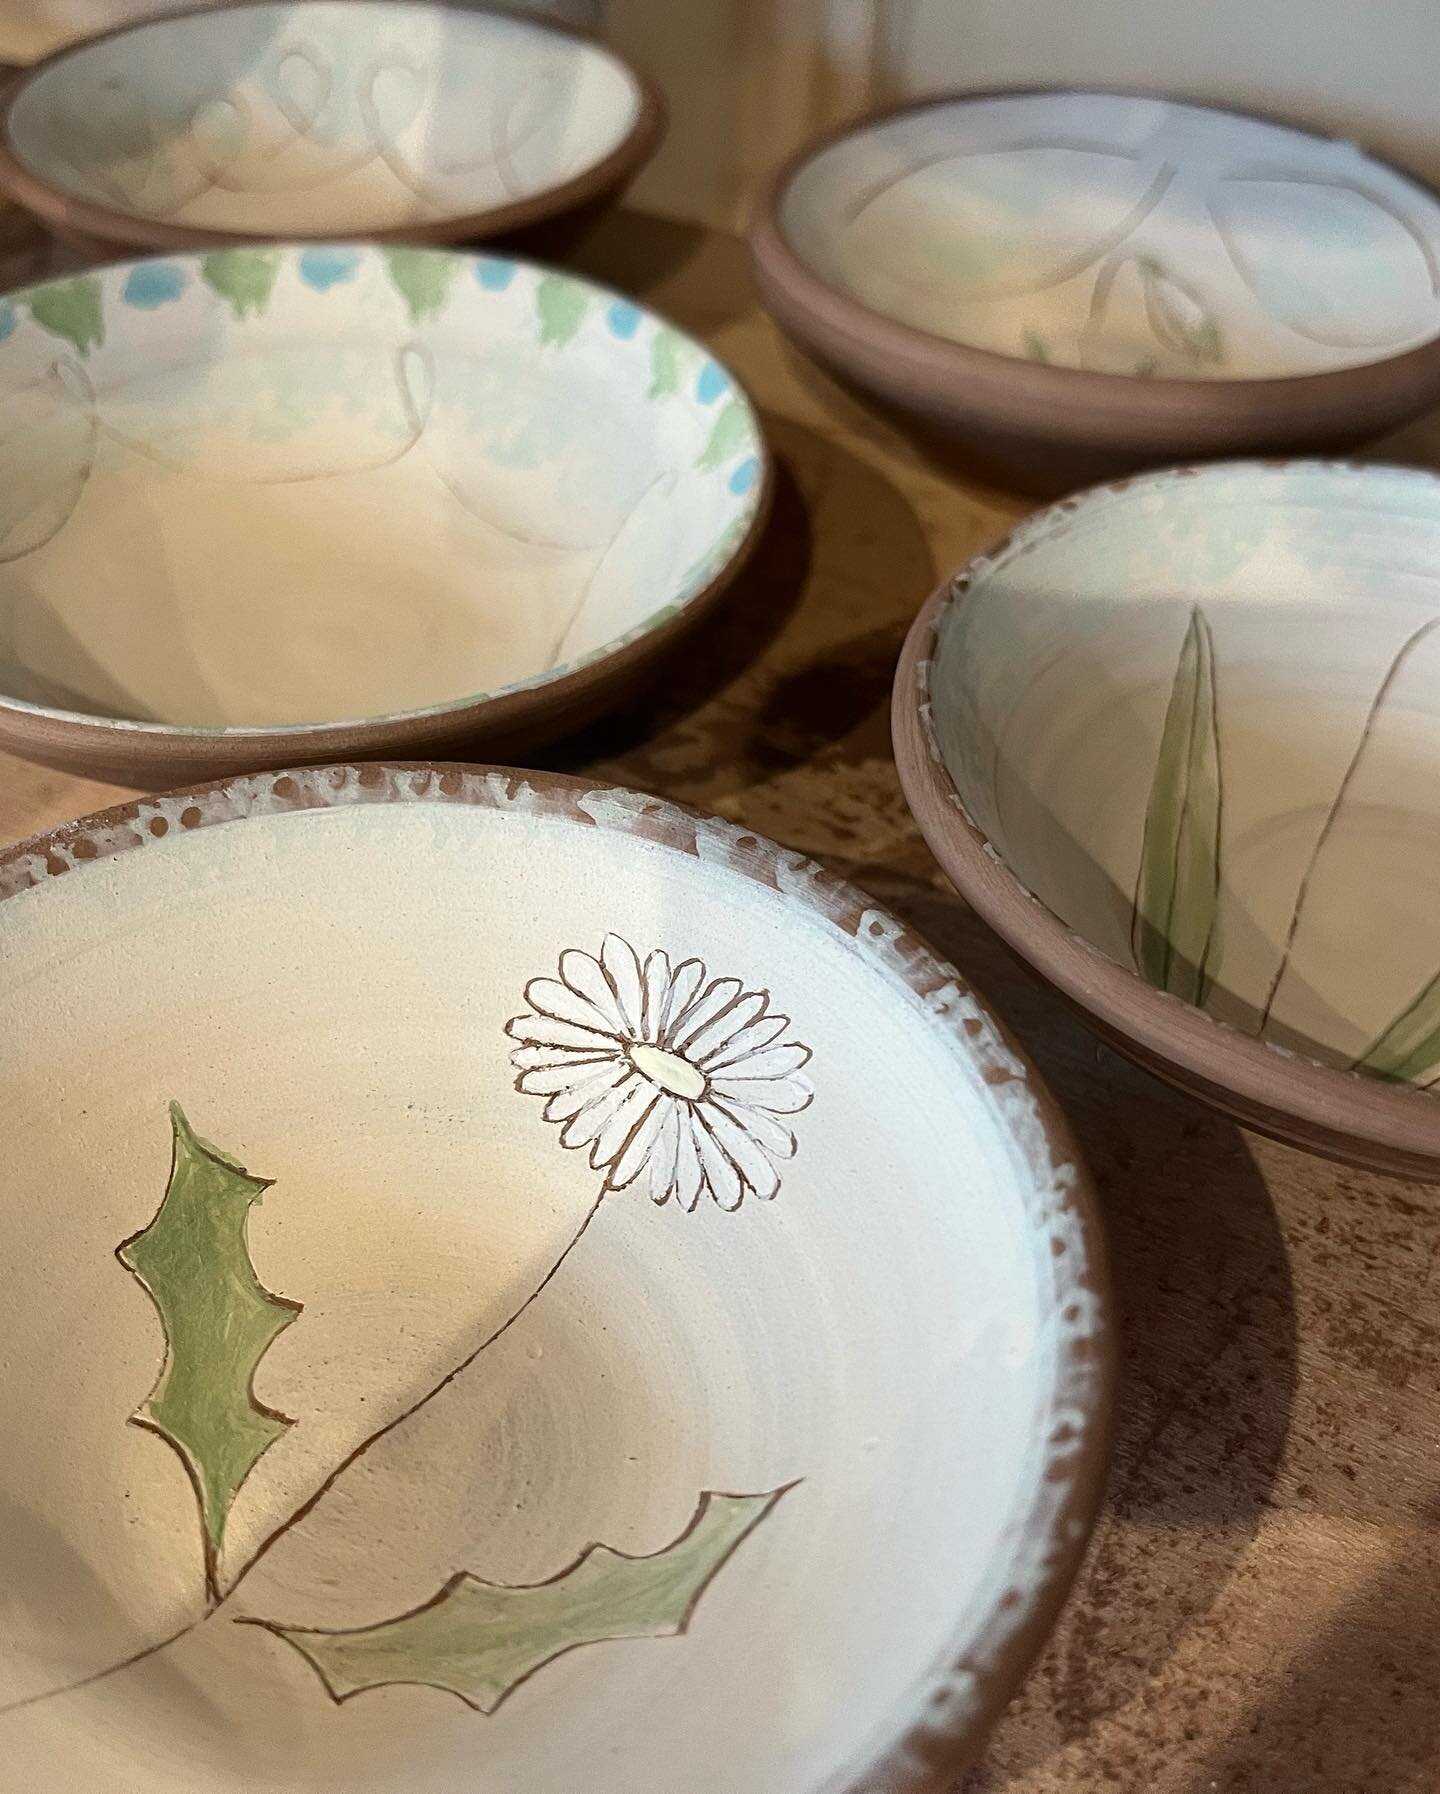 There are so many stages to creating ceramics, some easier to grasp than others. In the pottery this weekend we did two firings, threw candle sticks which are particularly pleasing, slipped mugs and decorated bowls. All in all a perfect weekend! 〰️ 〰